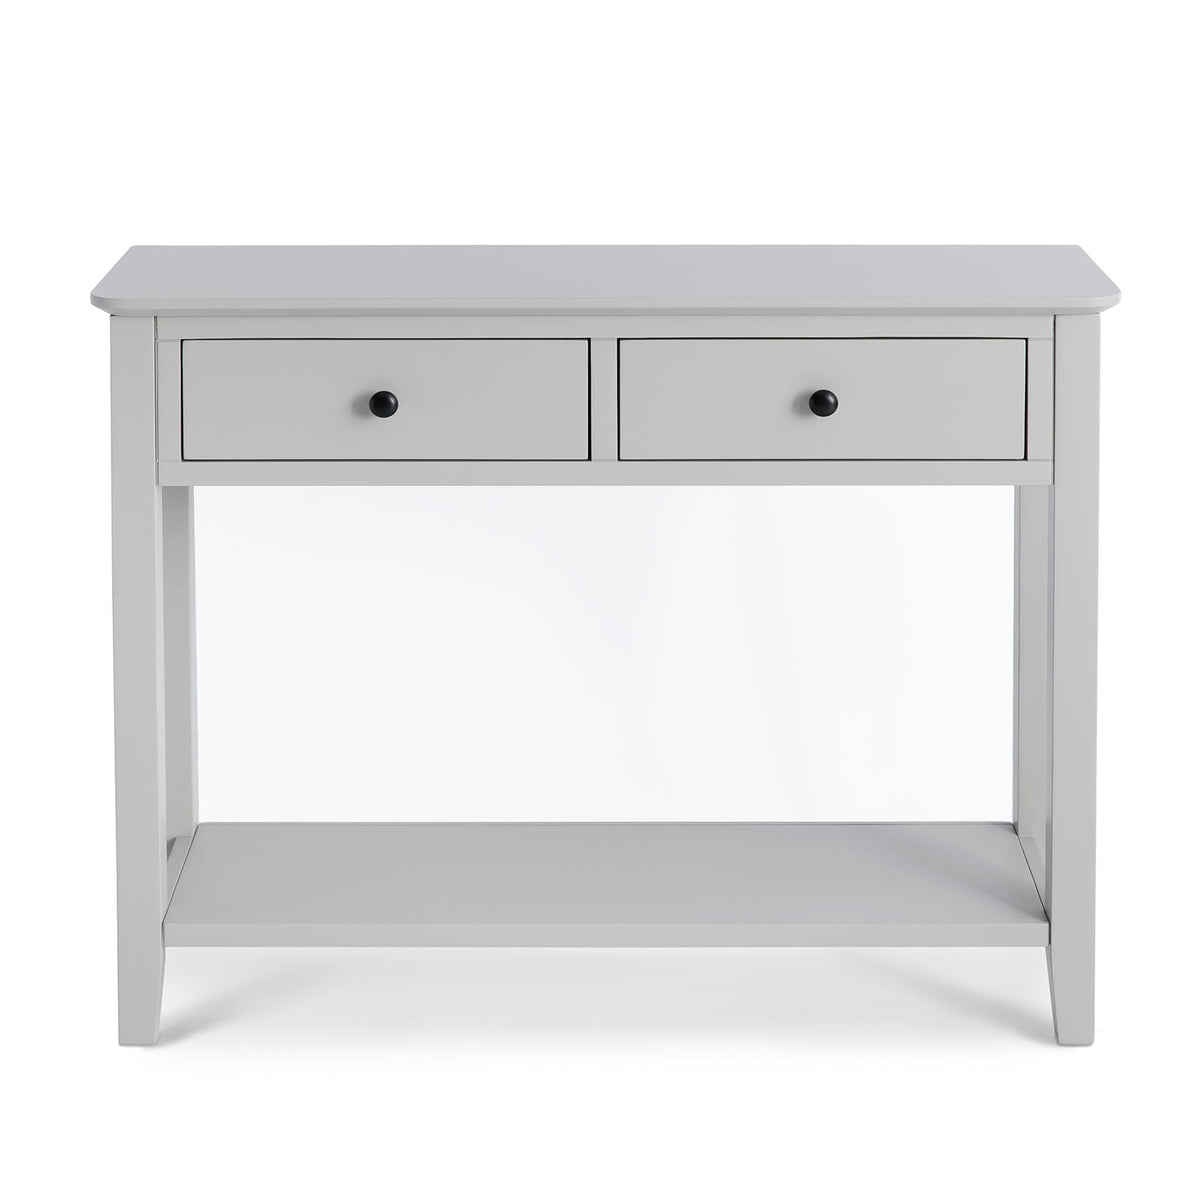 Elgin Grey Large Console Table - Front view